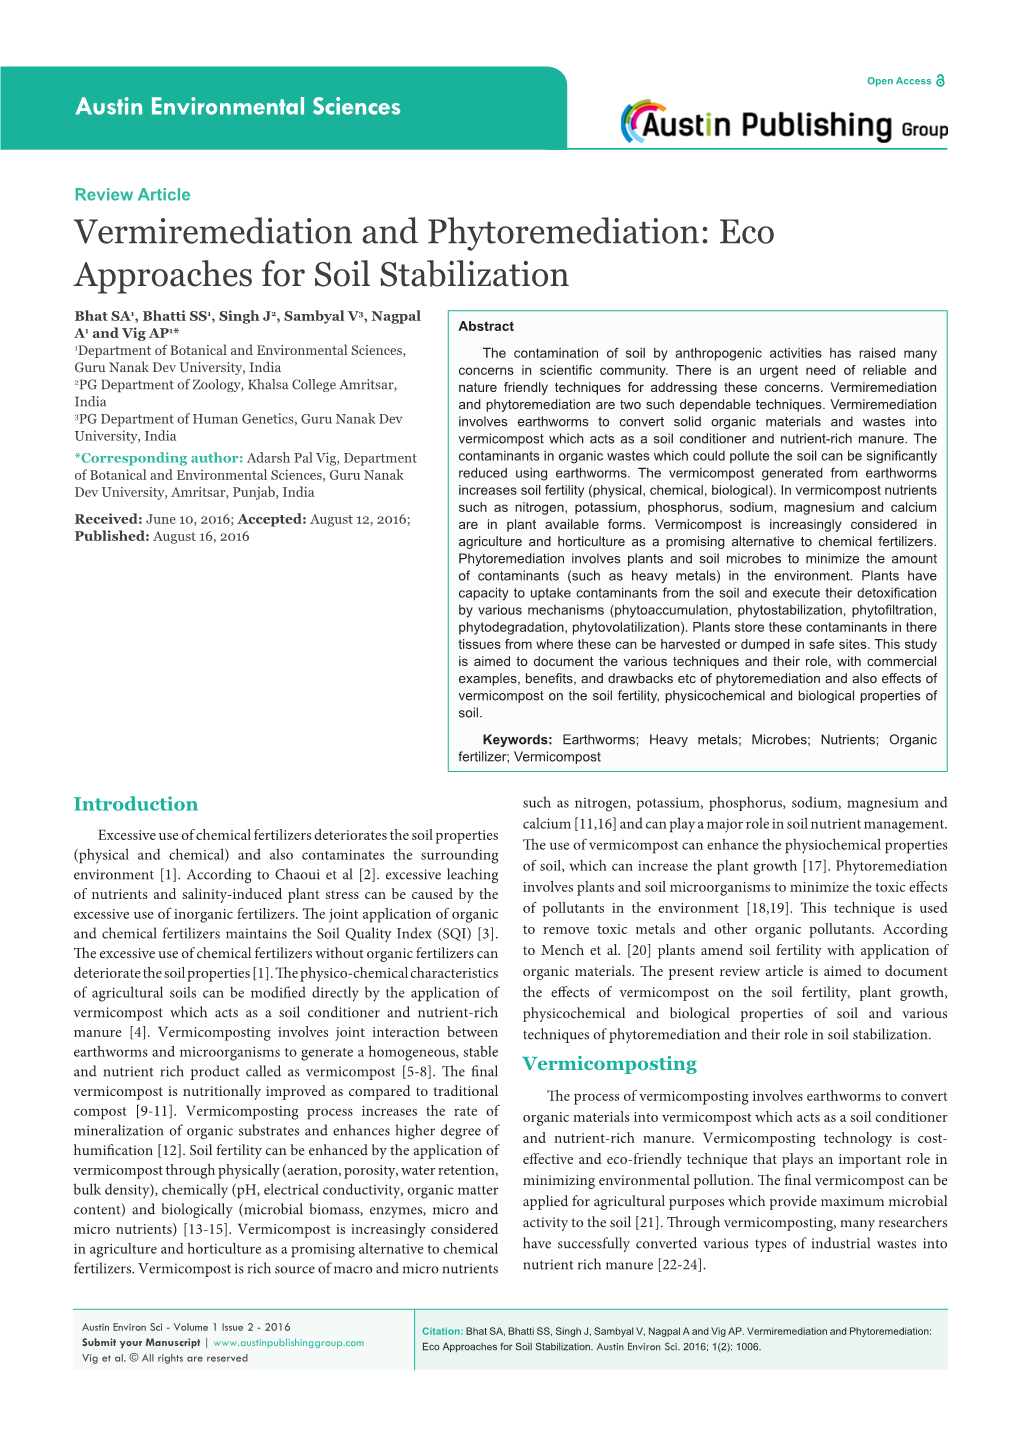 Vermiremediation and Phytoremediation: Eco Approaches for Soil Stabilization